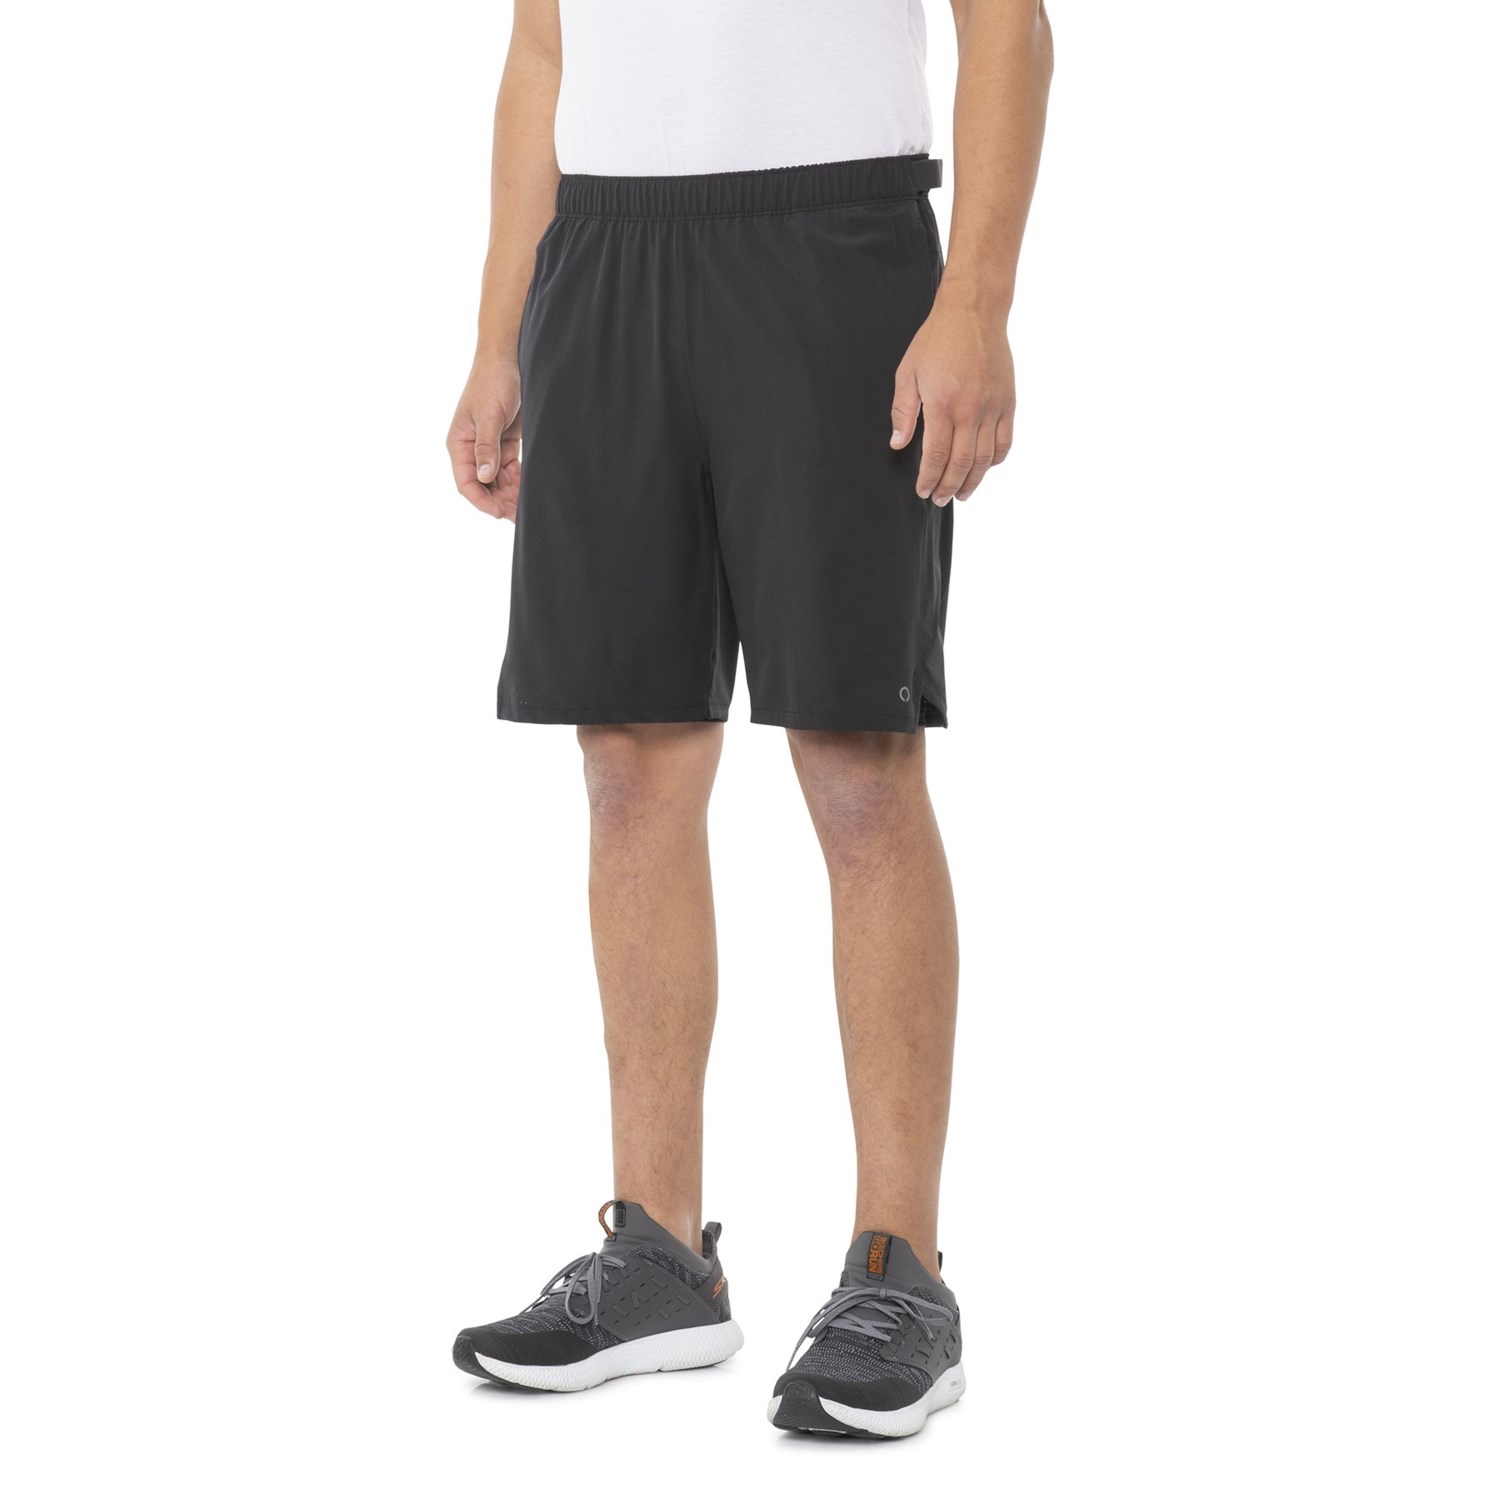 Skora Perforated Stretch-Woven Running Shorts (For Men) - Save 54%